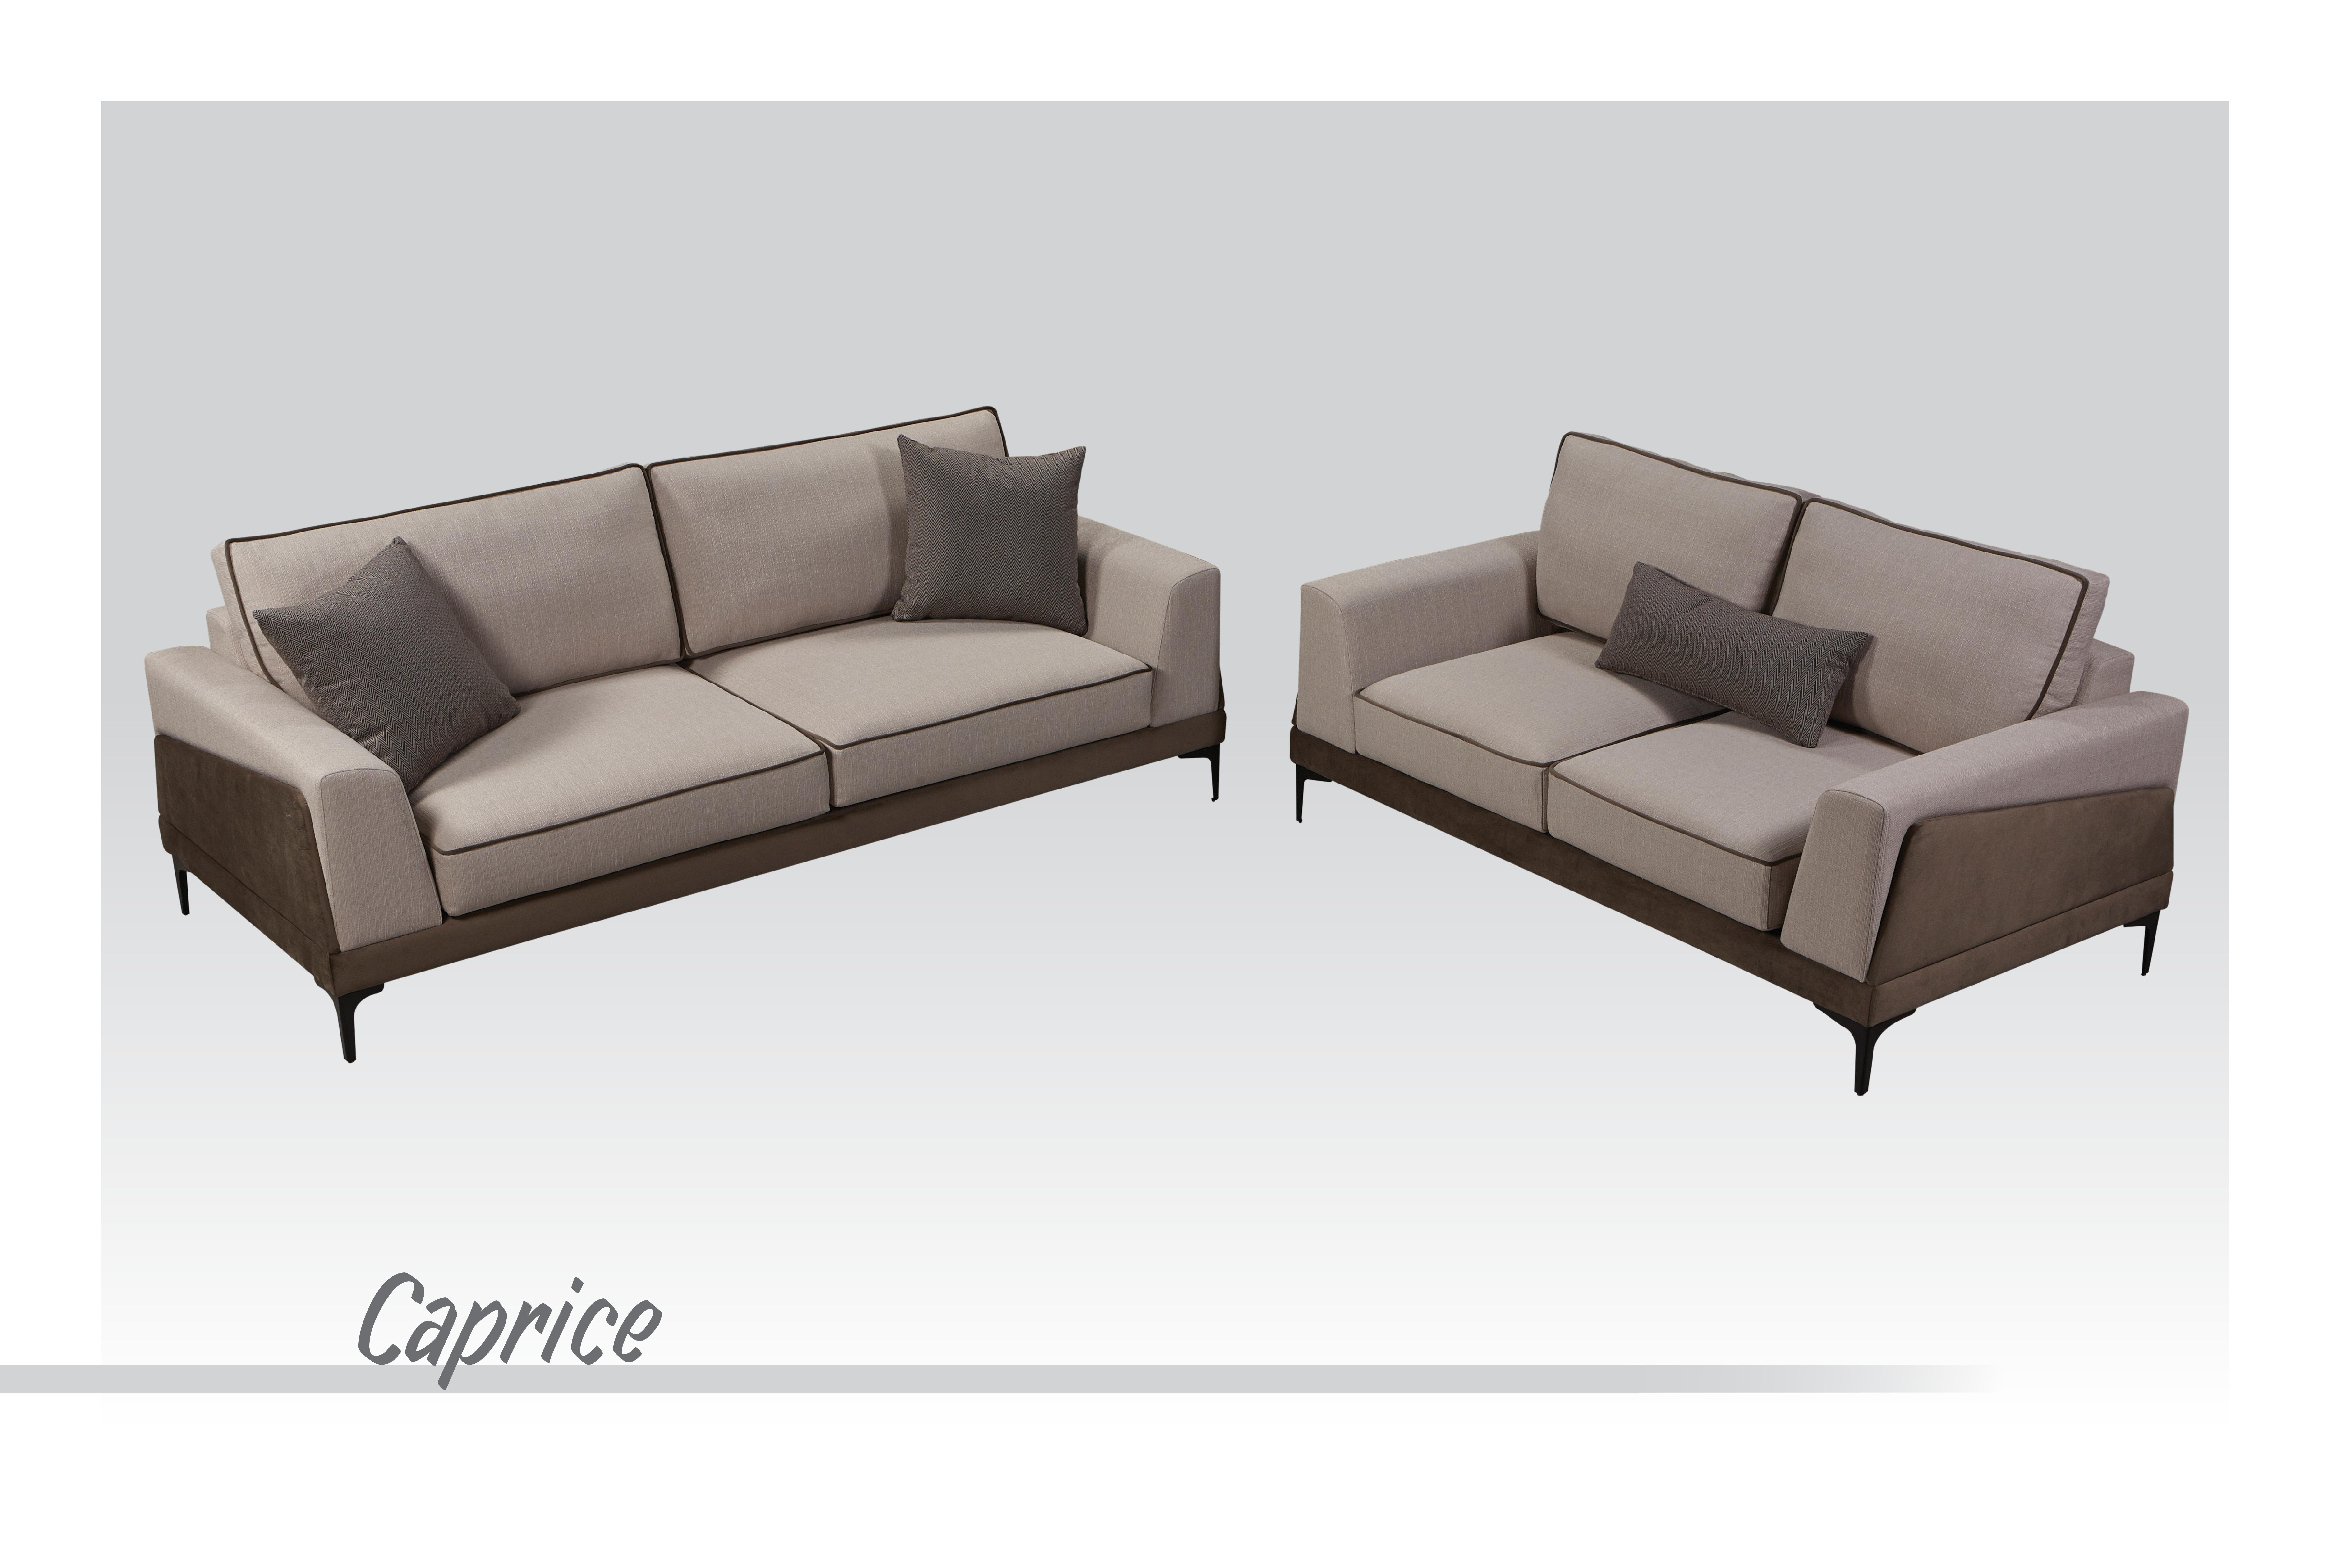 3-seated & 2-seated sofas "Caprice"